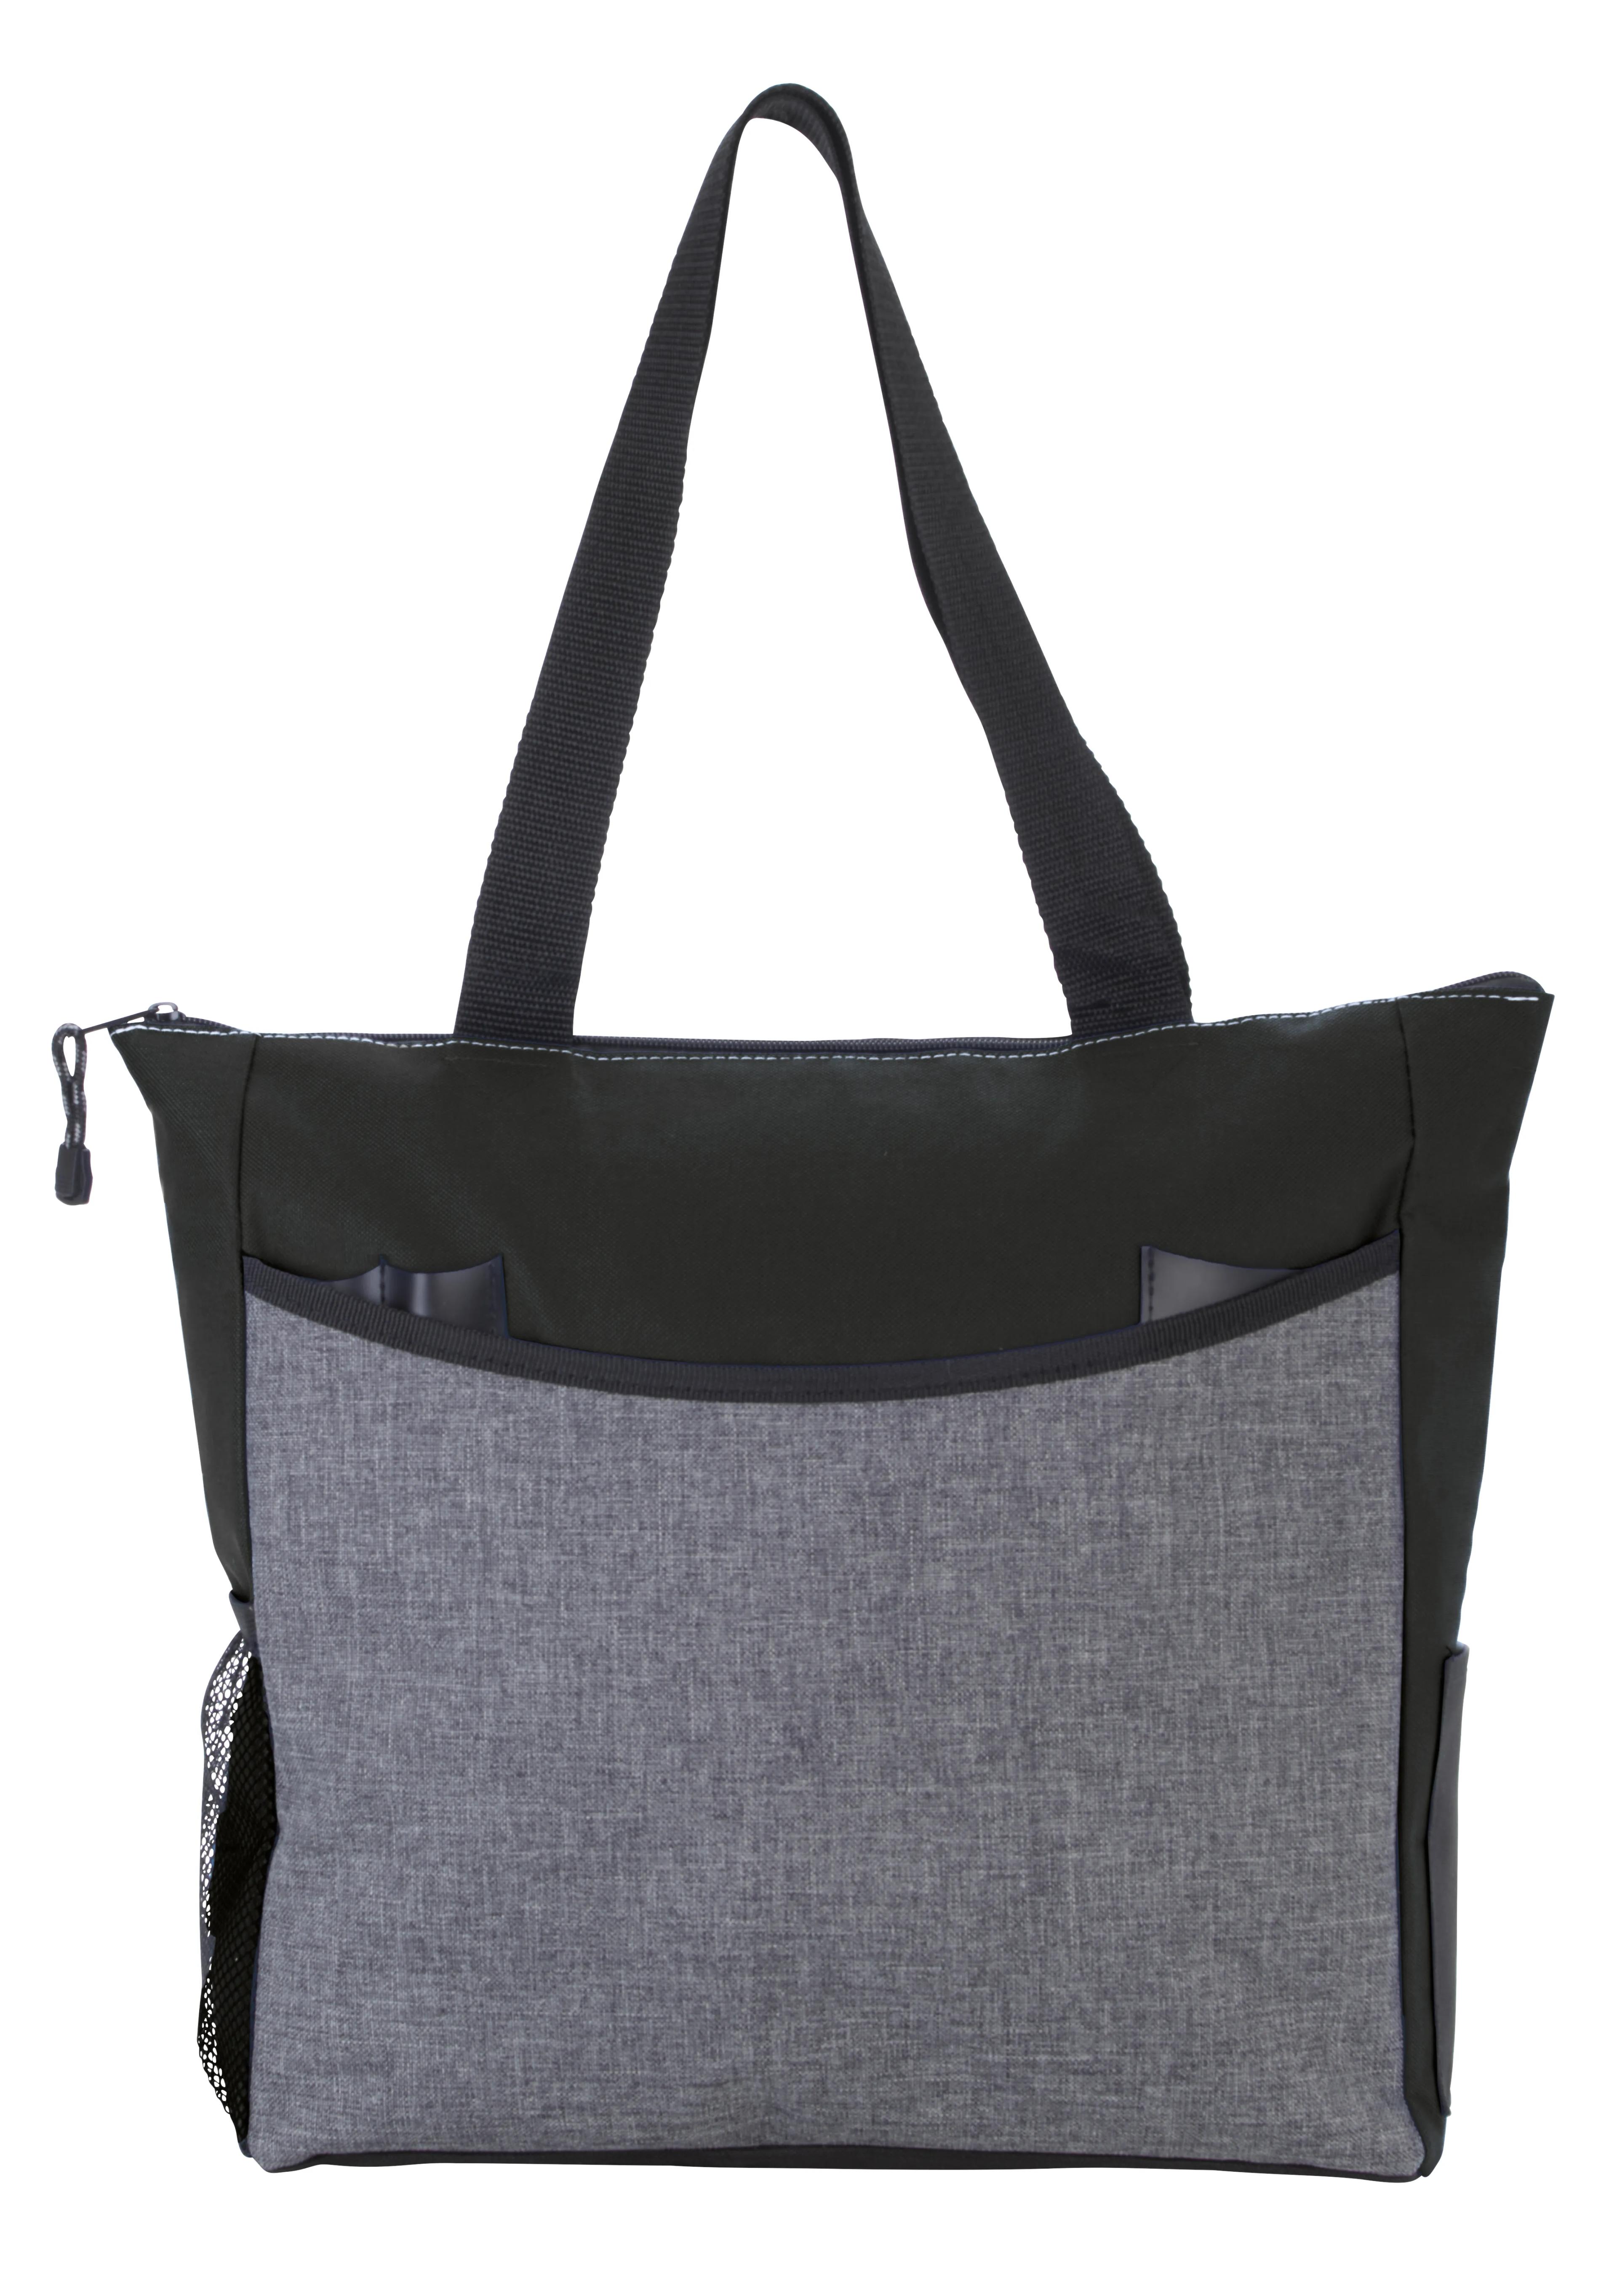 Two-Tone TranSport It Tote 12 of 29